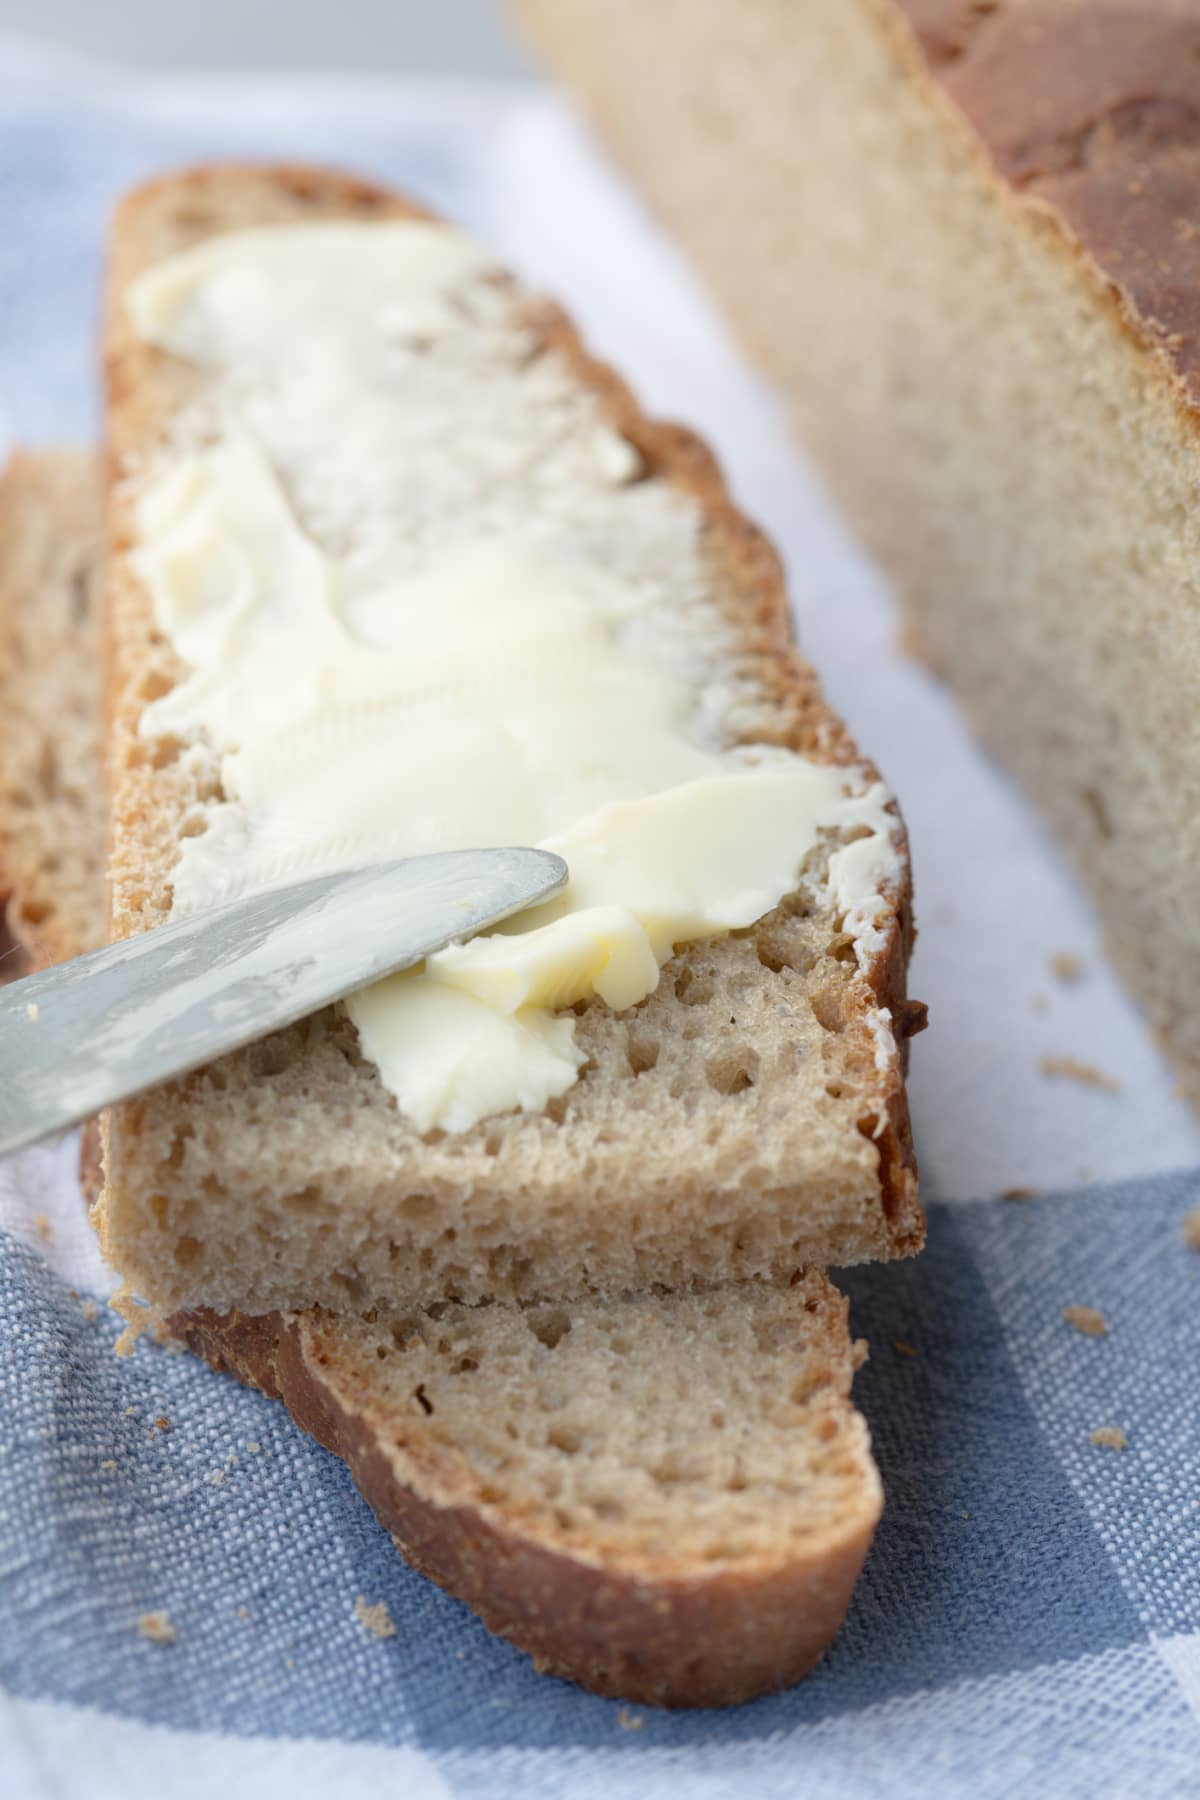 Slices of wholemeal bread with butter